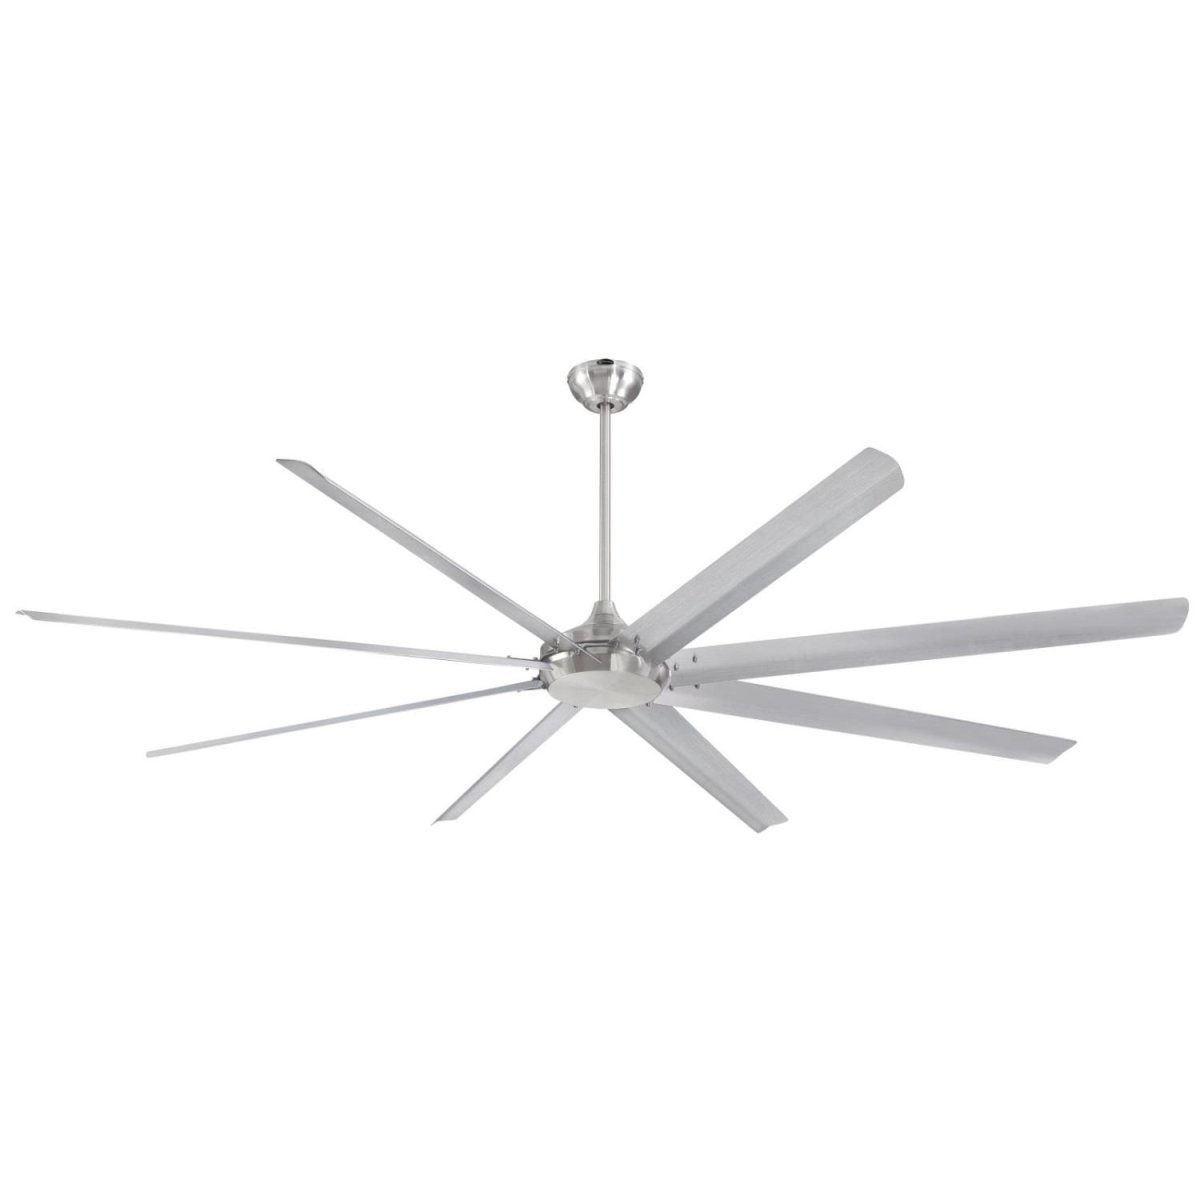 Picture of Westinghouse 7224900 100 in. Brushed Nickel DC Motor Indoor Ceiling Fan with Aluminum Blades